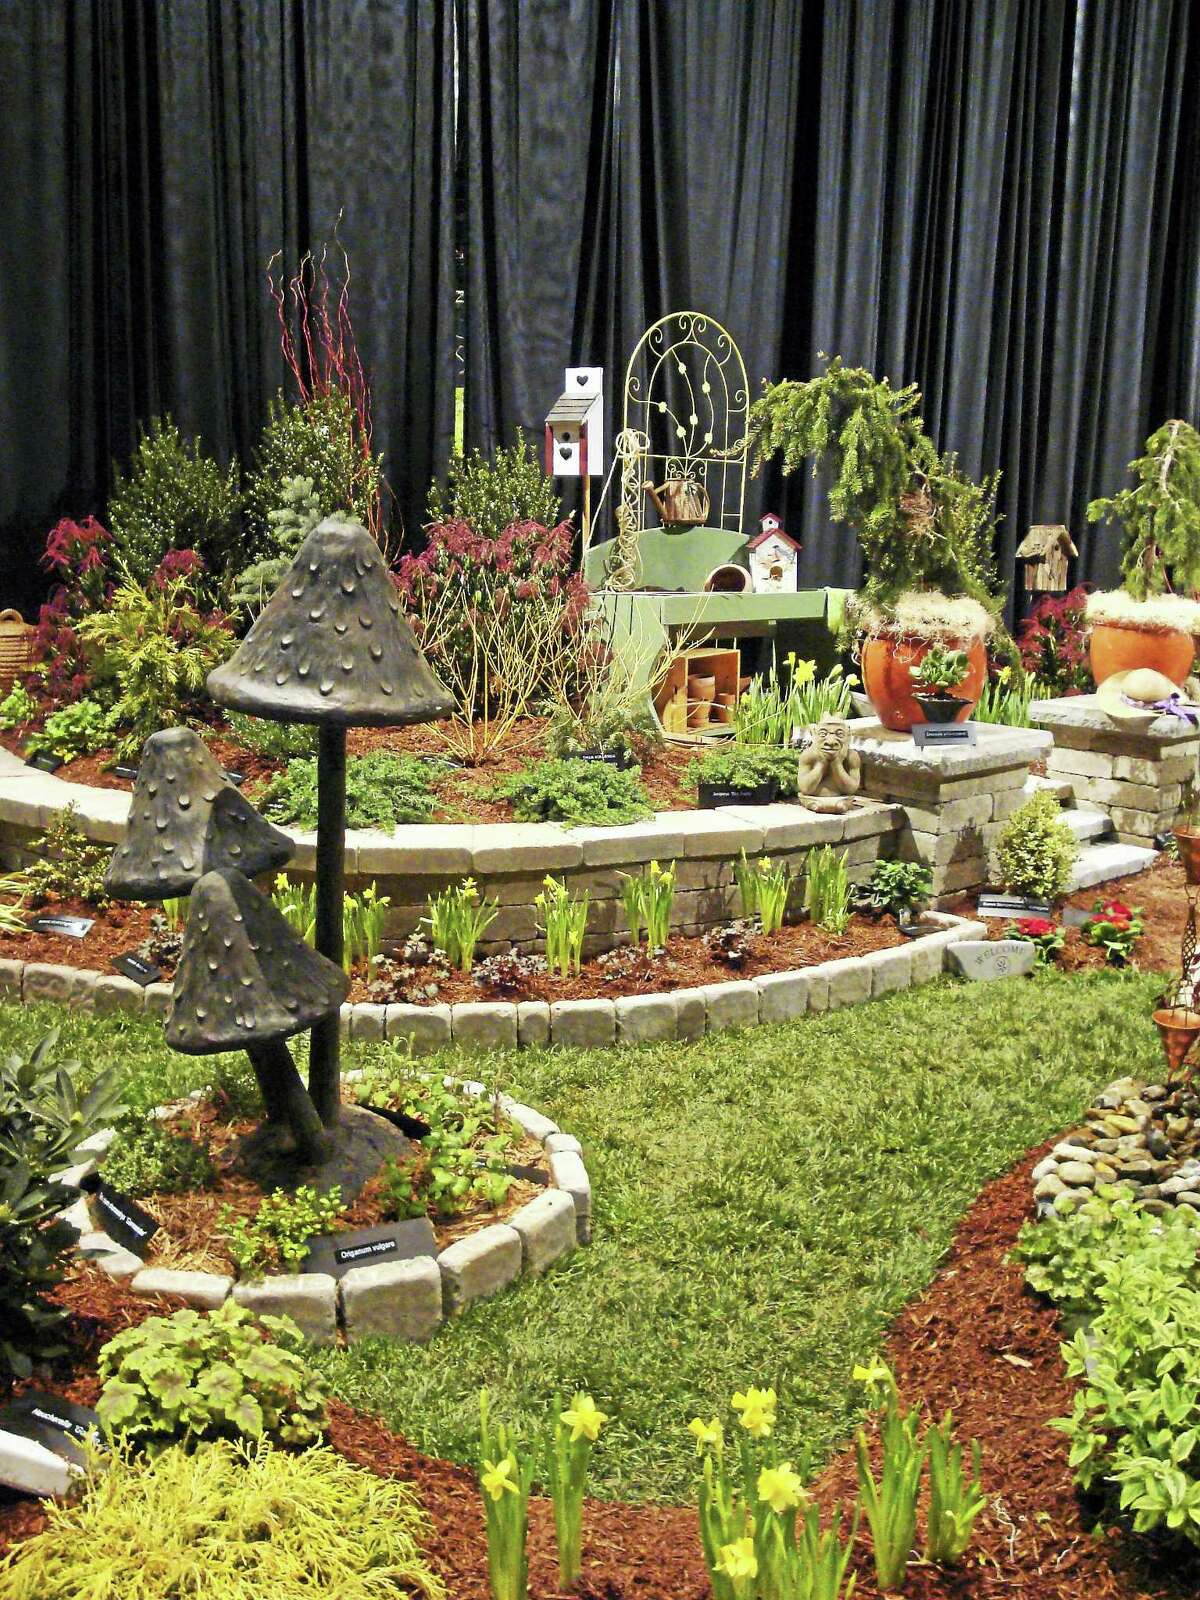 Contributed photoA landscape mushroom sculpture at the 2016 Connecticut Flower and Garden show.